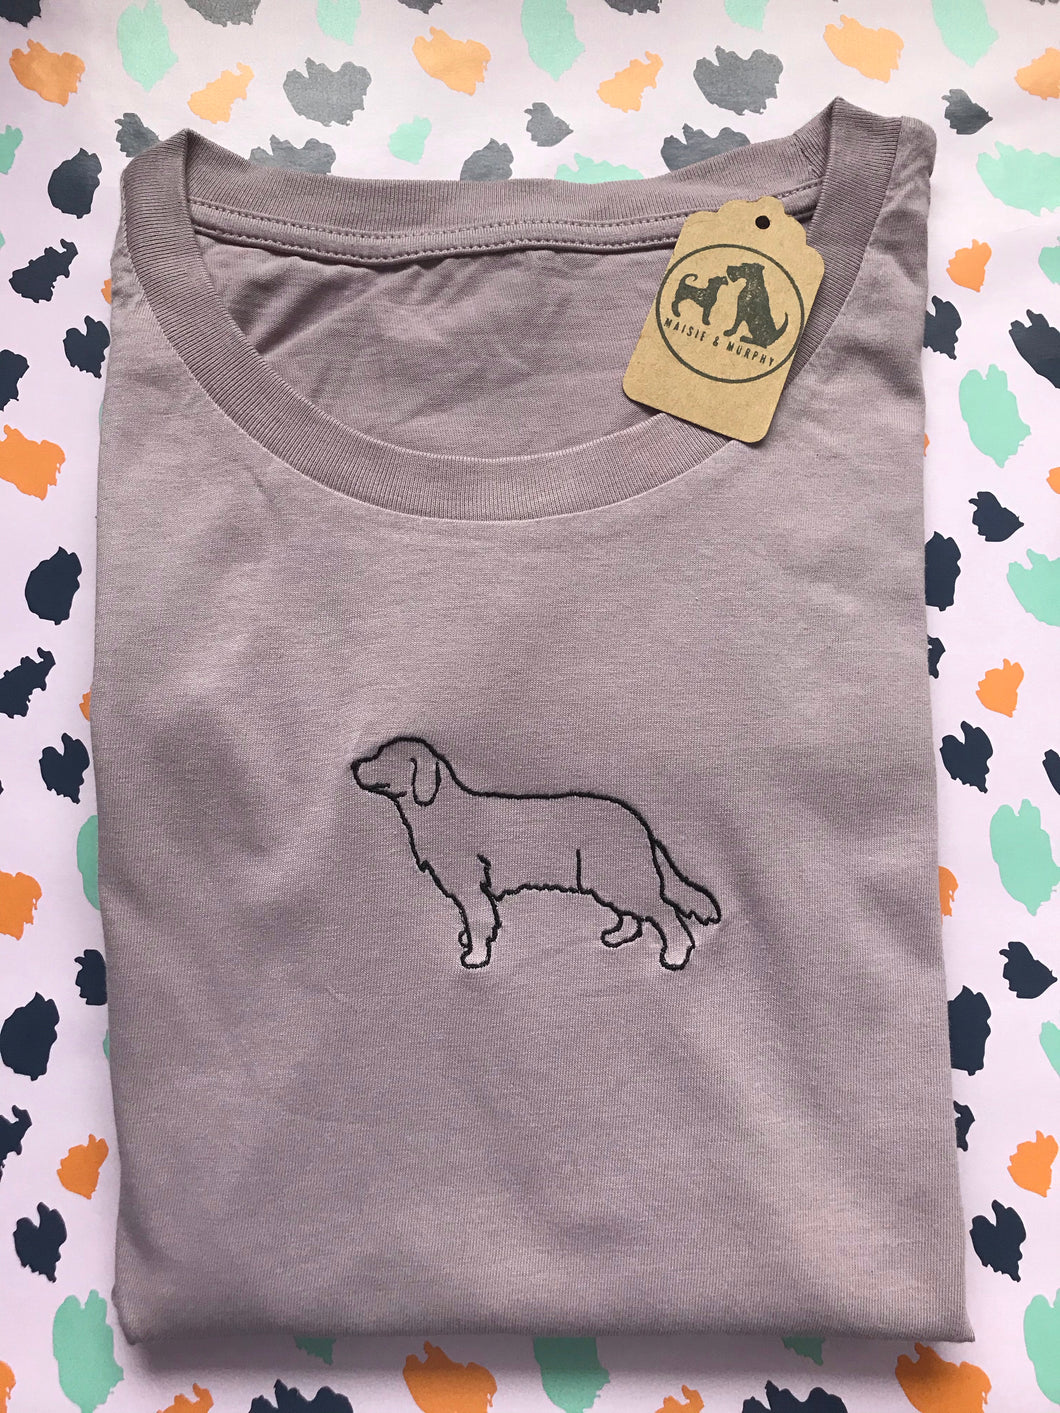 Embroidered Golden Retriever T-shirt - Gifts for goldie lovers and owners